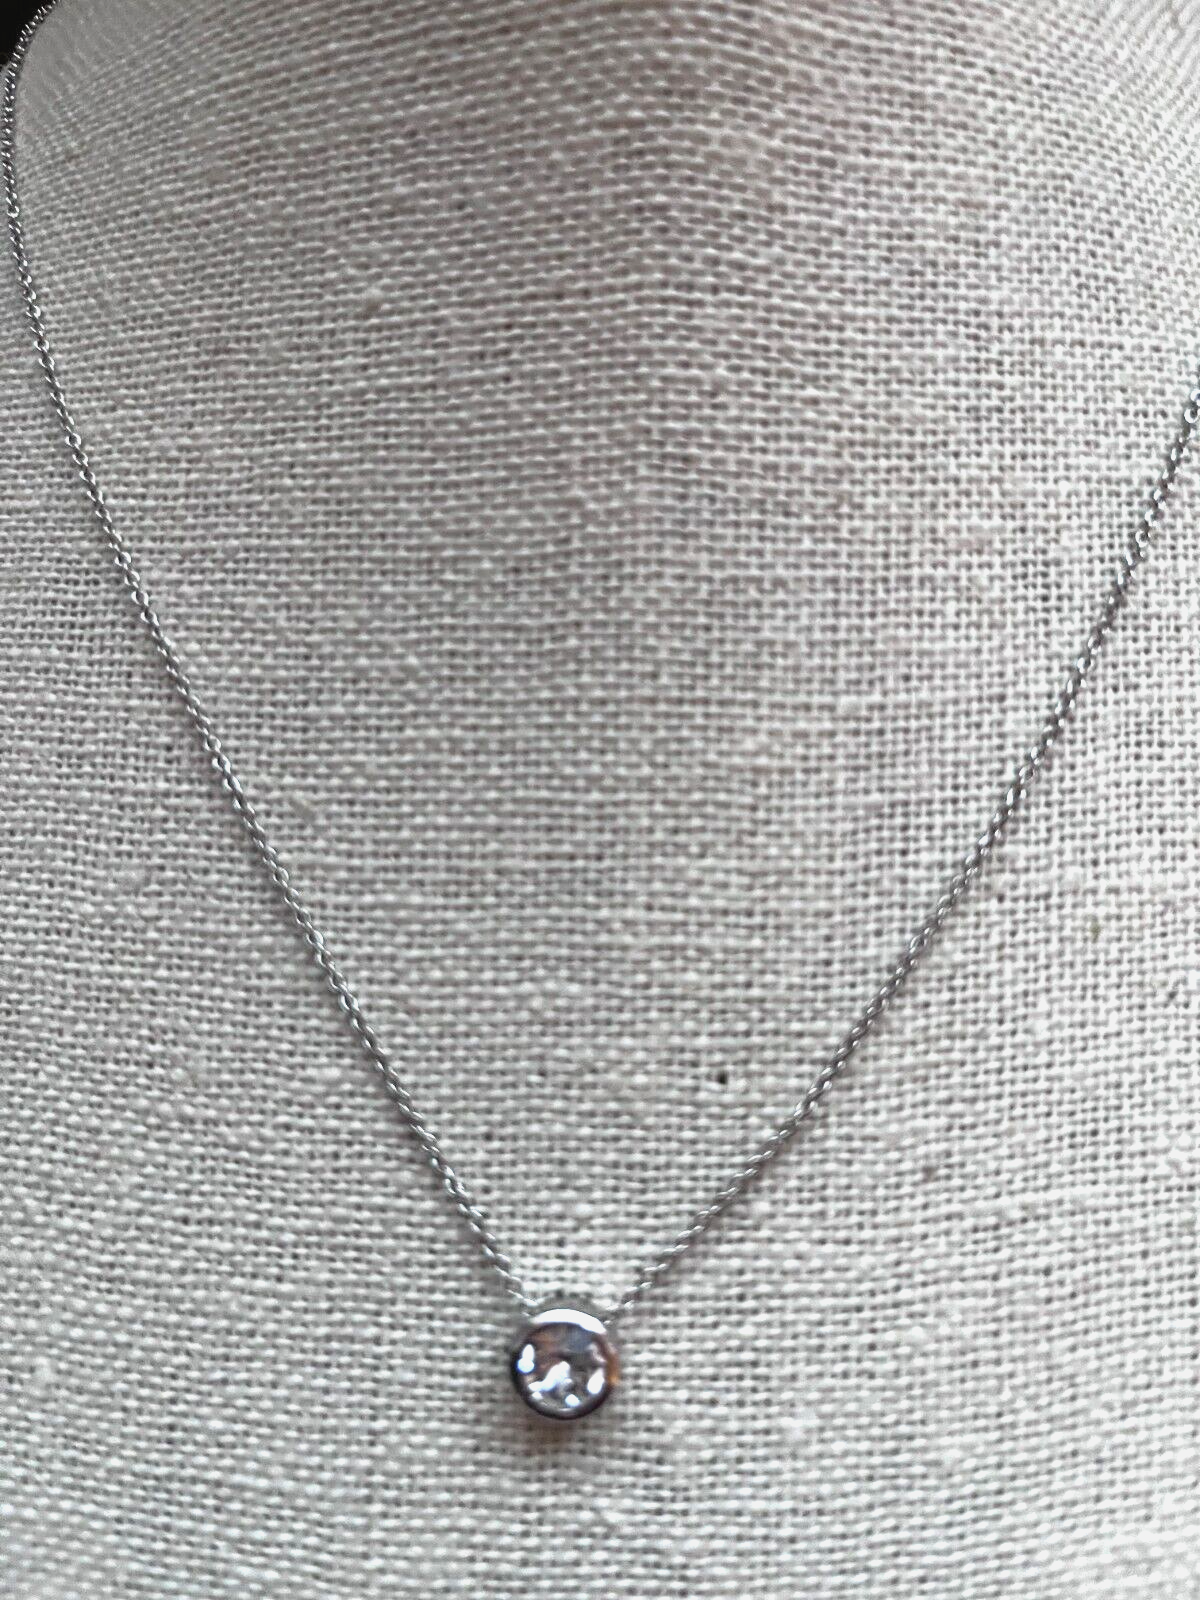 Primary image for MESTIGE Silver Tone SWAROVSKI Crystal Solitaire Necklace  10in Minimalist Signed